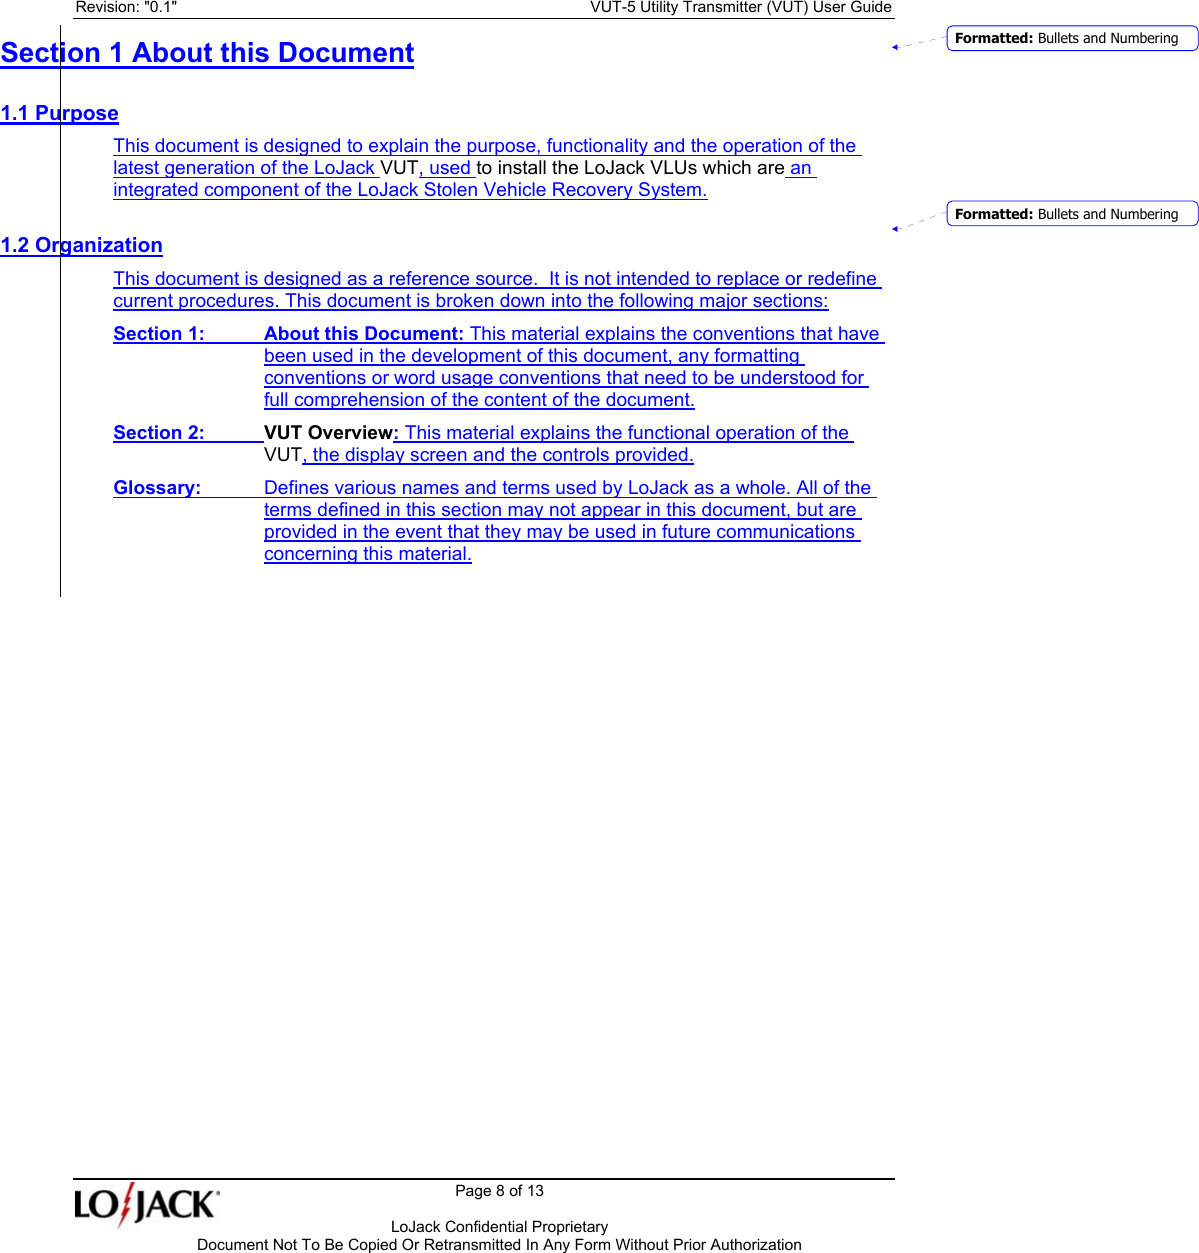 Revision: &quot;0.1&quot;    VUT-5 Utility Transmitter (VUT) User Guide   Page 8 of 13      LoJack Confidential Proprietary  Document Not To Be Copied Or Retransmitted In Any Form Without Prior Authorization  Section 1 About this Document 1.1 Purpose This document is designed to explain the purpose, functionality and the operation of the latest generation of the LoJack VUT, used to install the LoJack VLUs which are an integrated component of the LoJack Stolen Vehicle Recovery System. 1.2 Organization This document is designed as a reference source.  It is not intended to replace or redefine current procedures. This document is broken down into the following major sections: Section 1: About this Document: This material explains the conventions that have been used in the development of this document, any formatting conventions or word usage conventions that need to be understood for full comprehension of the content of the document. Section 2:   VUT Overview: This material explains the functional operation of the VUT, the display screen and the controls provided. Glossary:  Defines various names and terms used by LoJack as a whole. All of the terms defined in this section may not appear in this document, but are provided in the event that they may be used in future communications concerning this material. Formatted: Bullets and NumberingFormatted: Bullets and Numbering